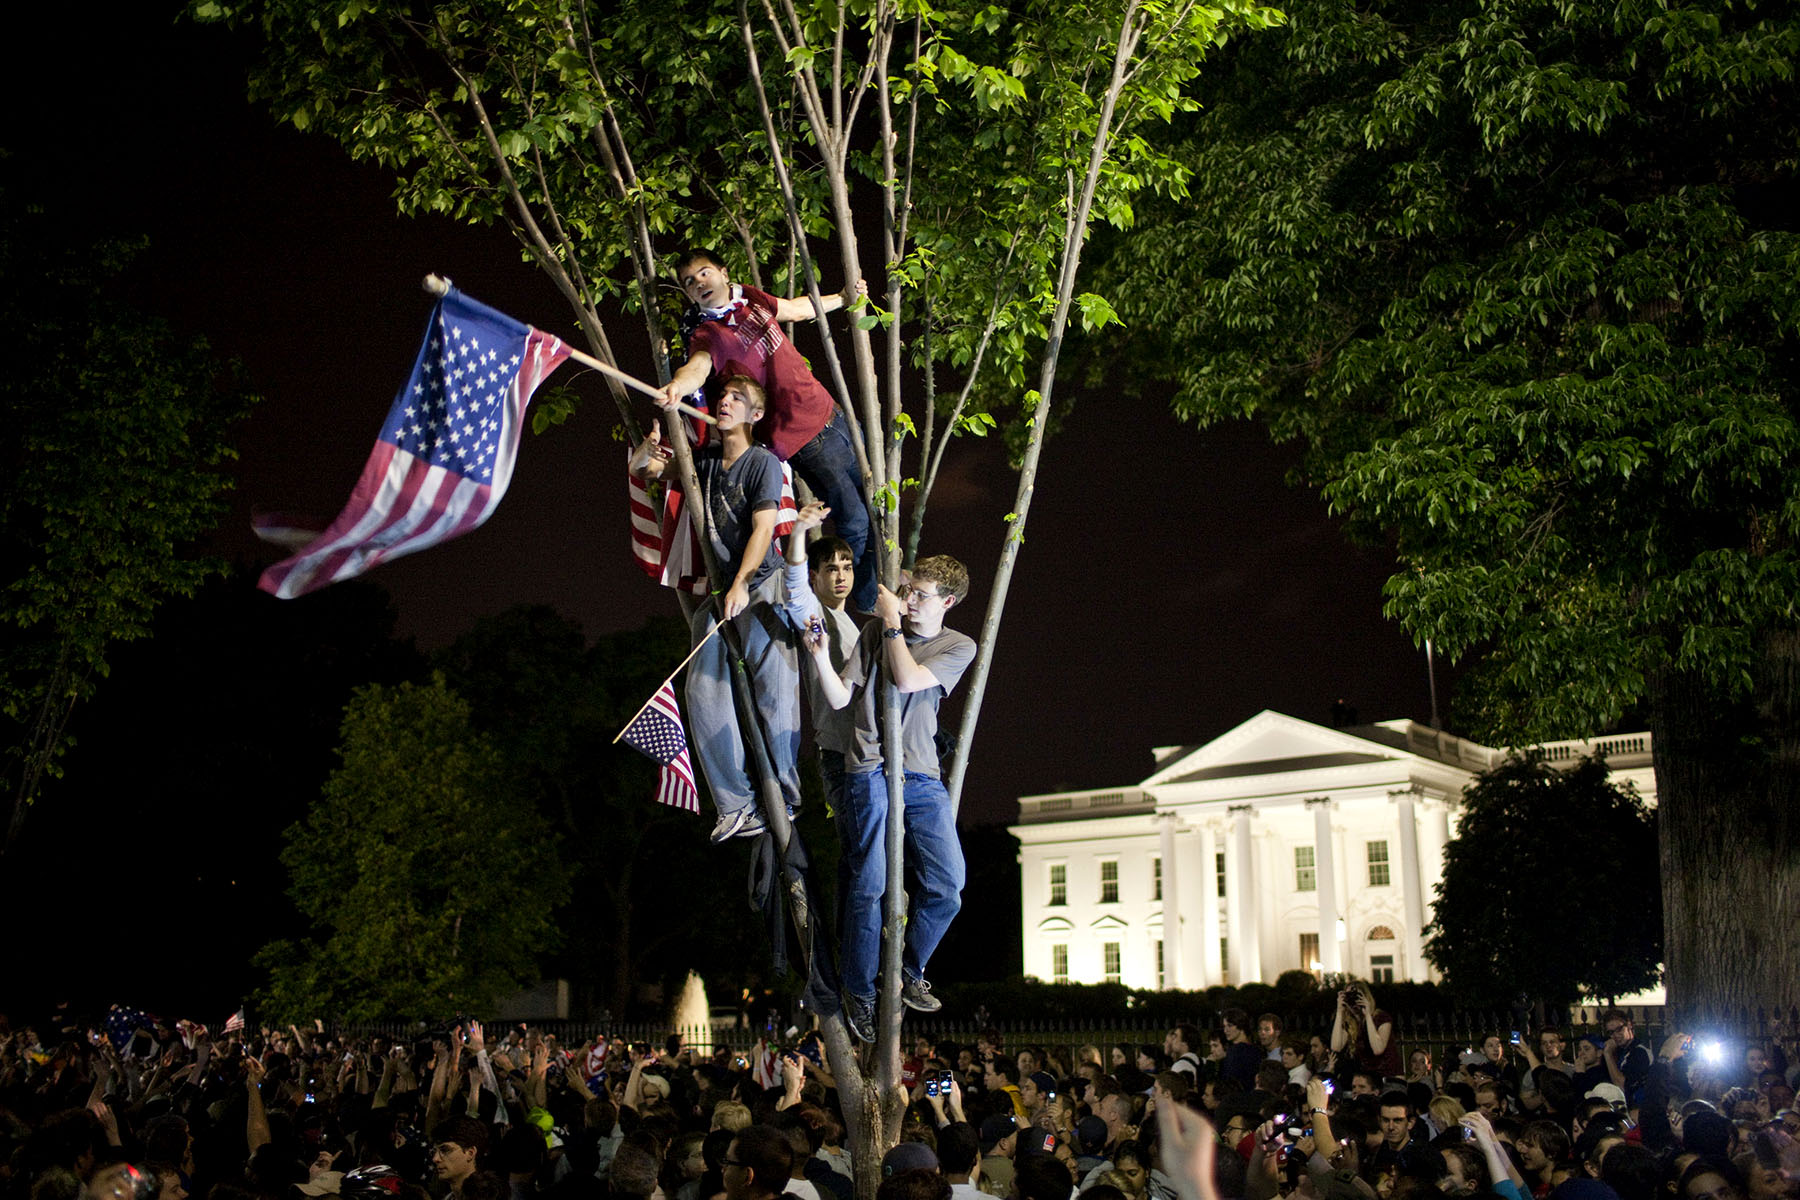 Crowds celebrate on Pennsylvania Avenue in front of the White House in Washington, after President Barack Obama announced that Al-Qaida's leader Osama bin Laden had been killed.